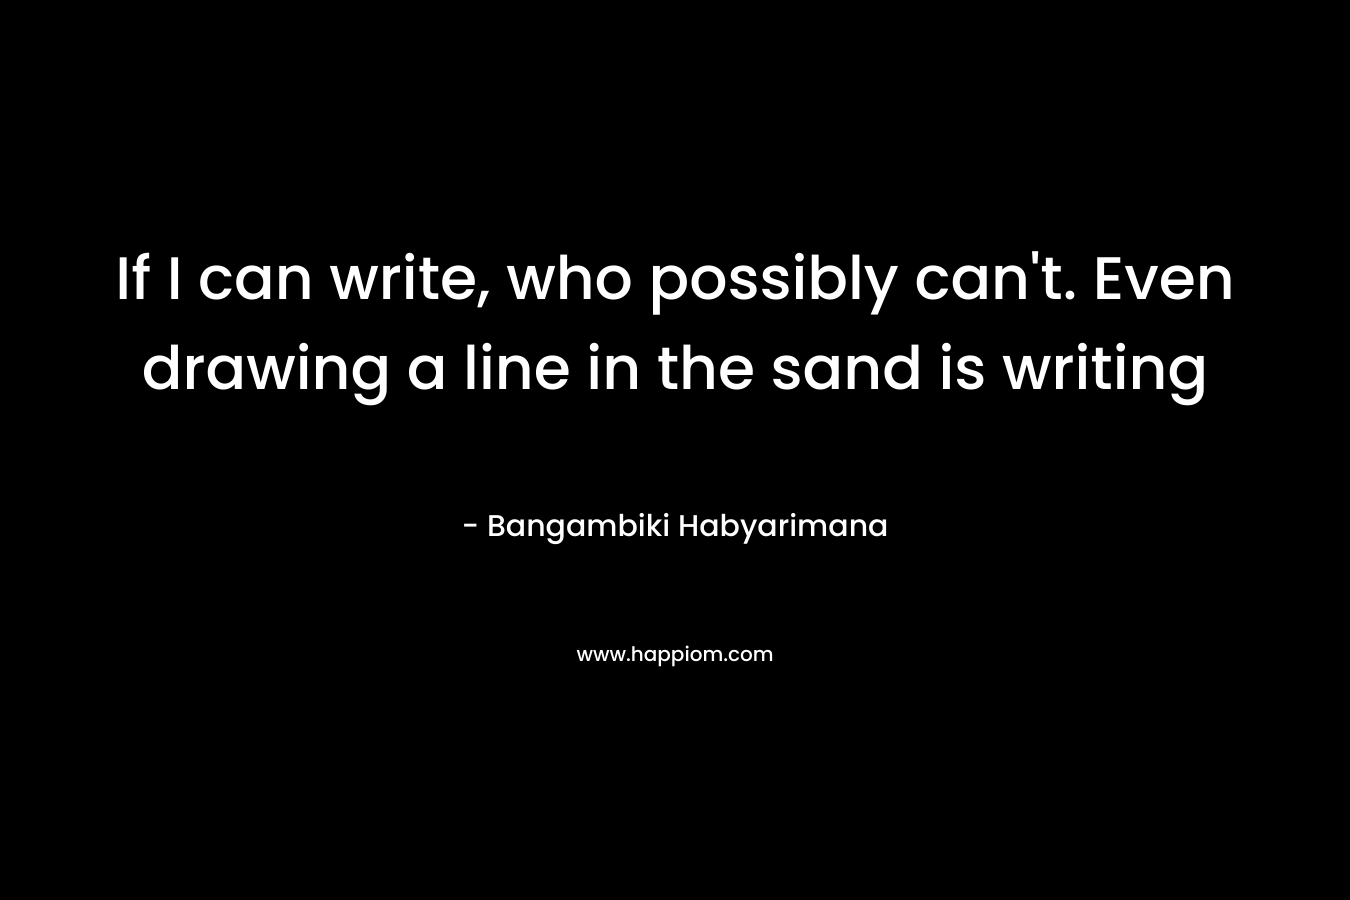 If I can write, who possibly can't. Even drawing a line in the sand is writing